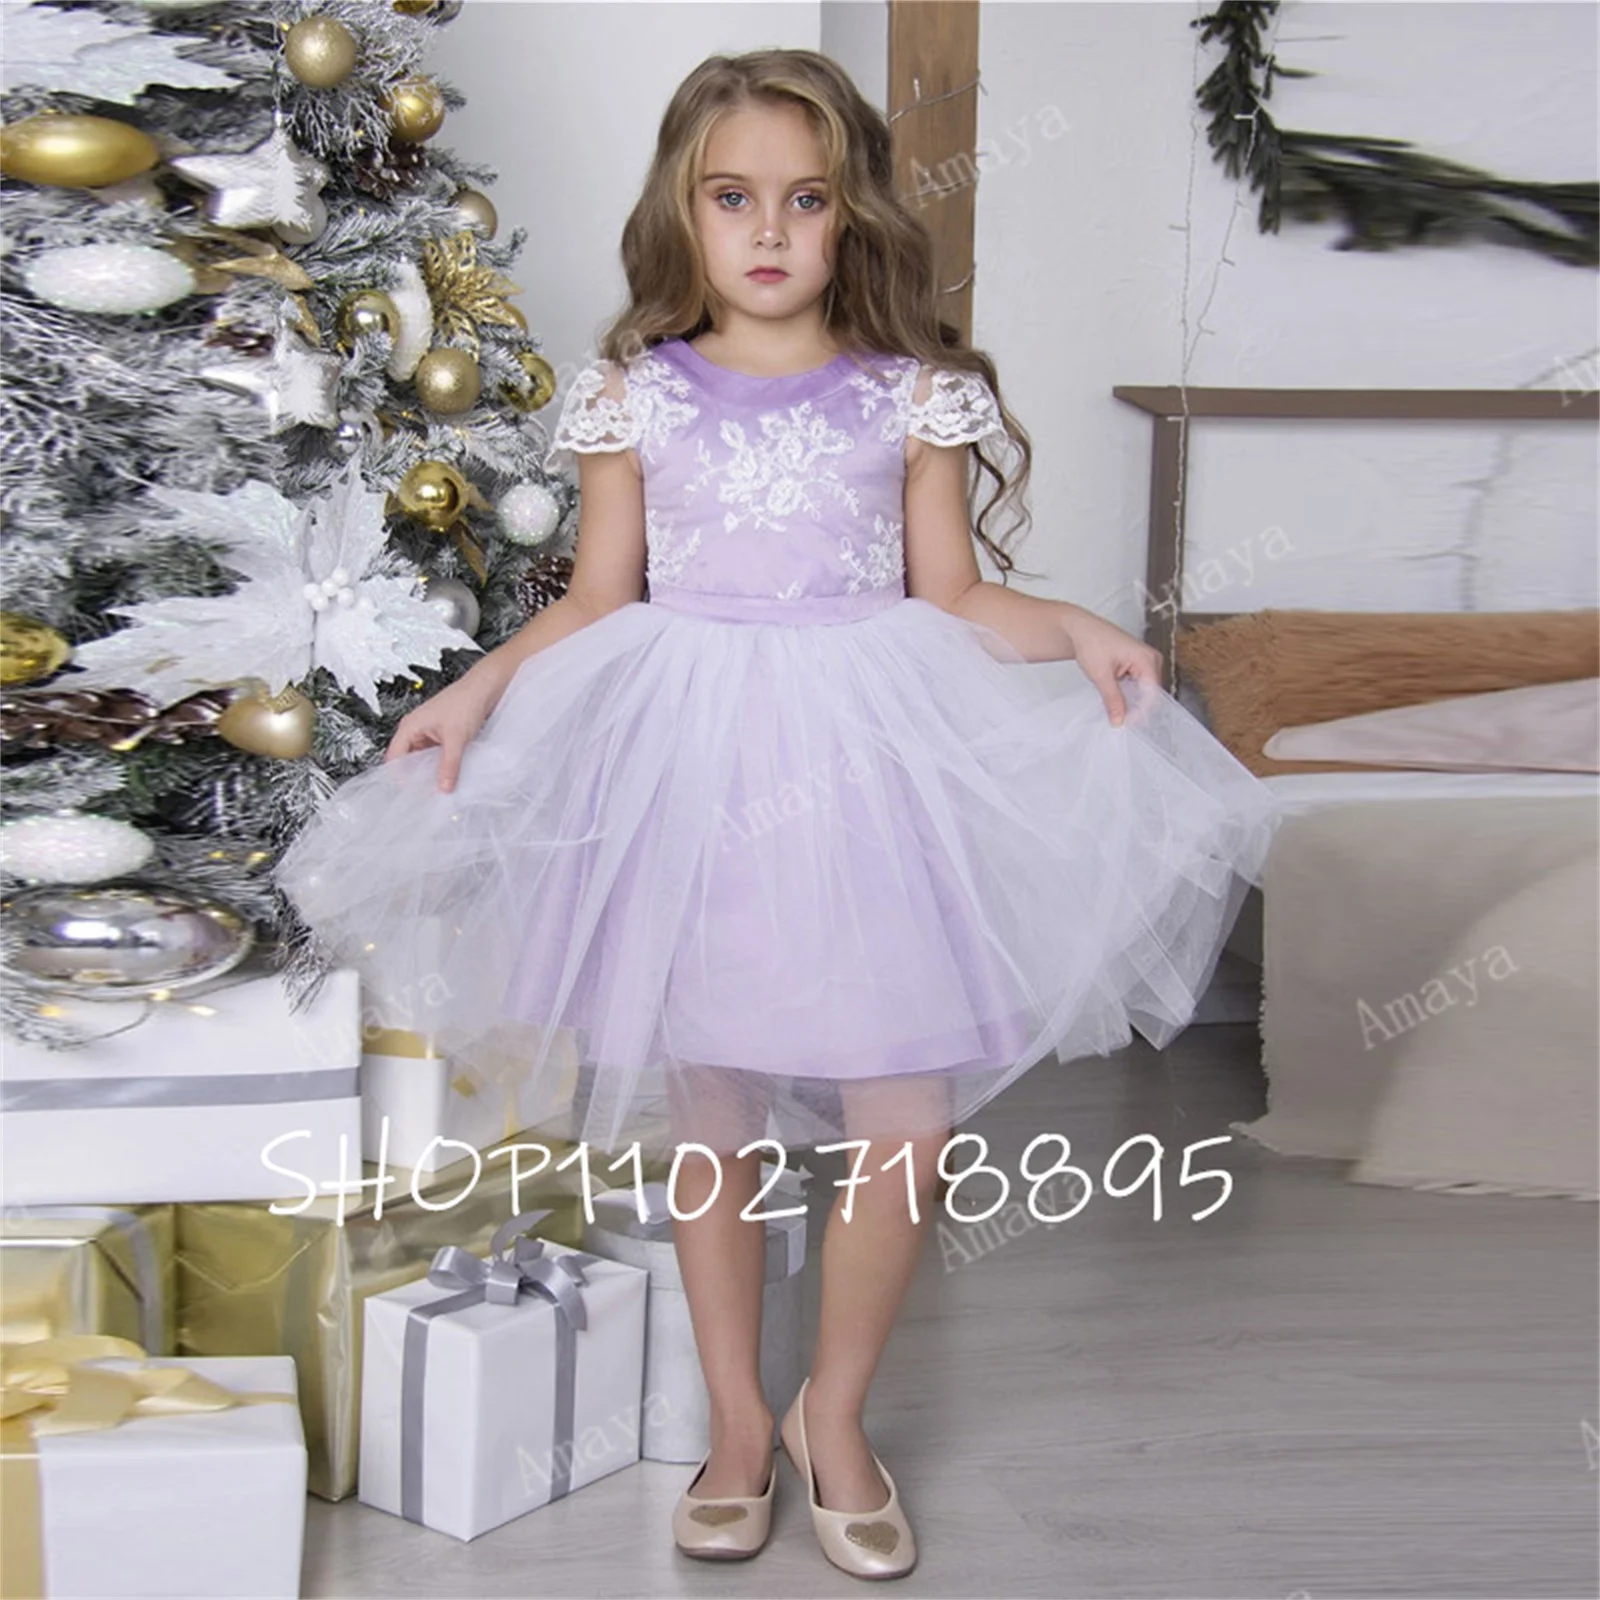 

Pink Ruffles Princess Puffy Flower Girl Dresses Tiered Tulle Knee Length Holy Communion Birthday Pageant Prom Ball Gown